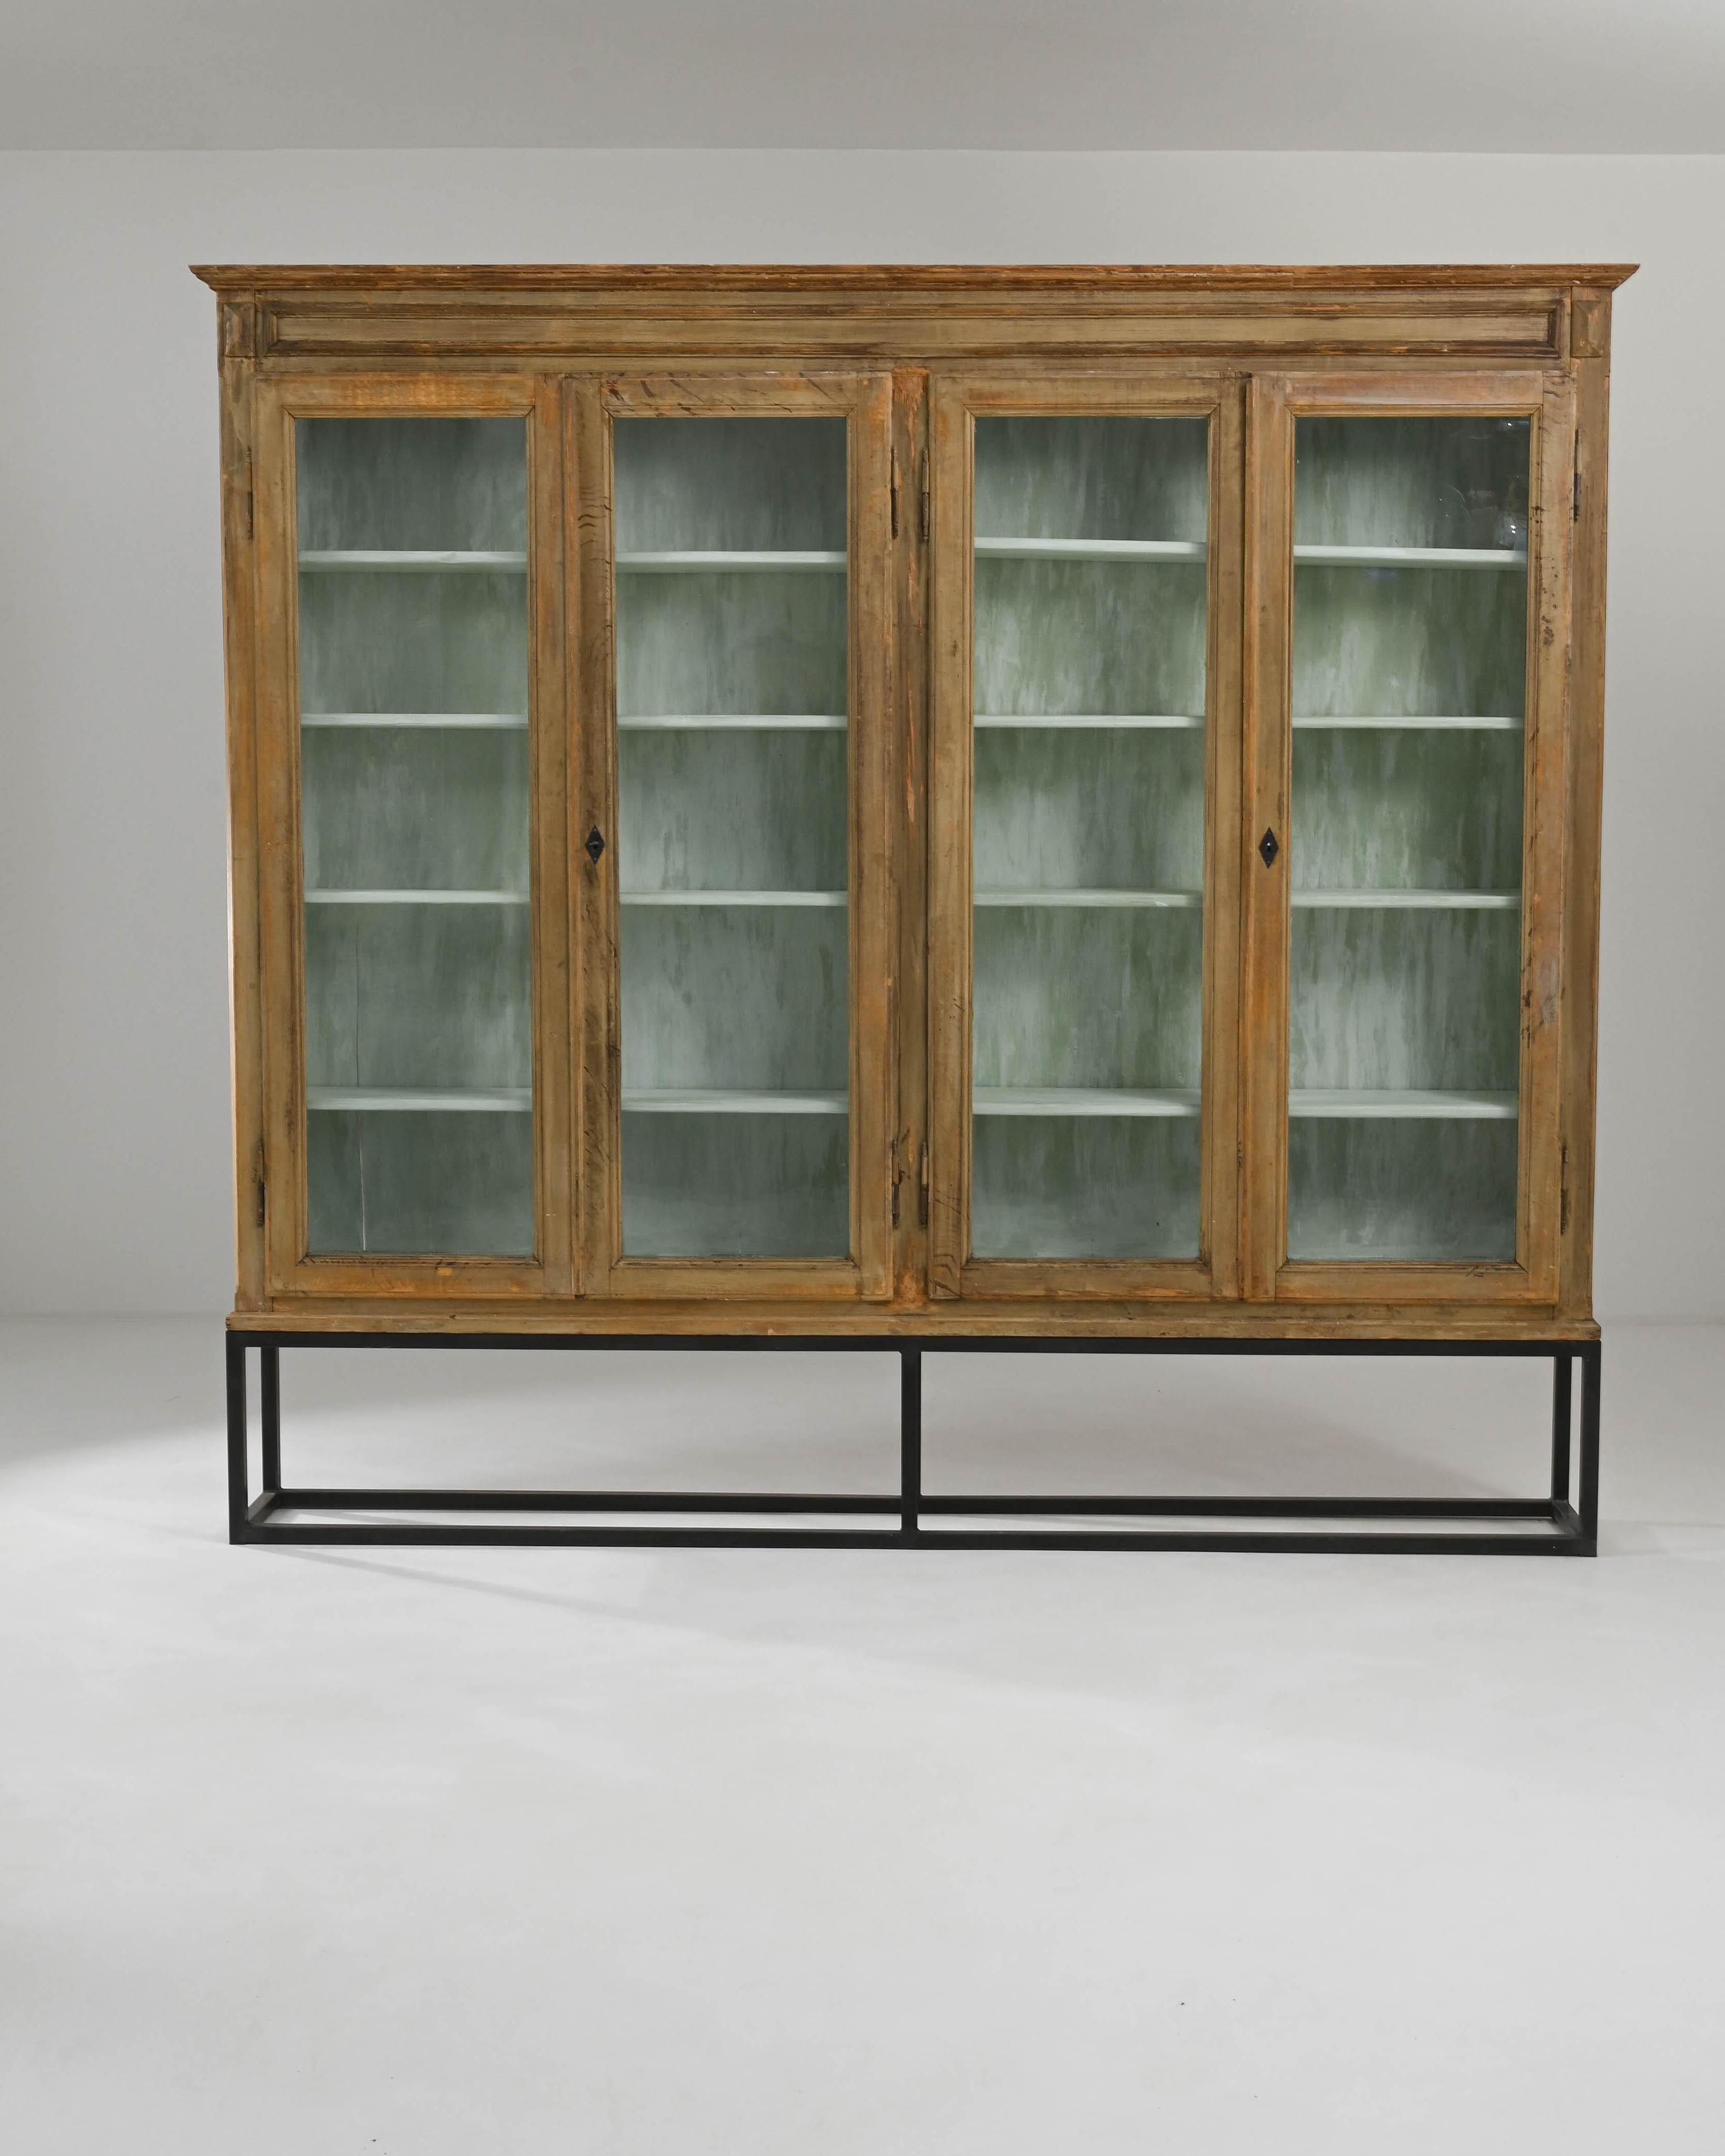 A wooden vitrine from France circa 1900 is mounted on a steel base. This imposing display case features two flanking pairs of glass paned doors which rise above the ground, stilted in the air by a geometric metal base. The cabinet's interior,